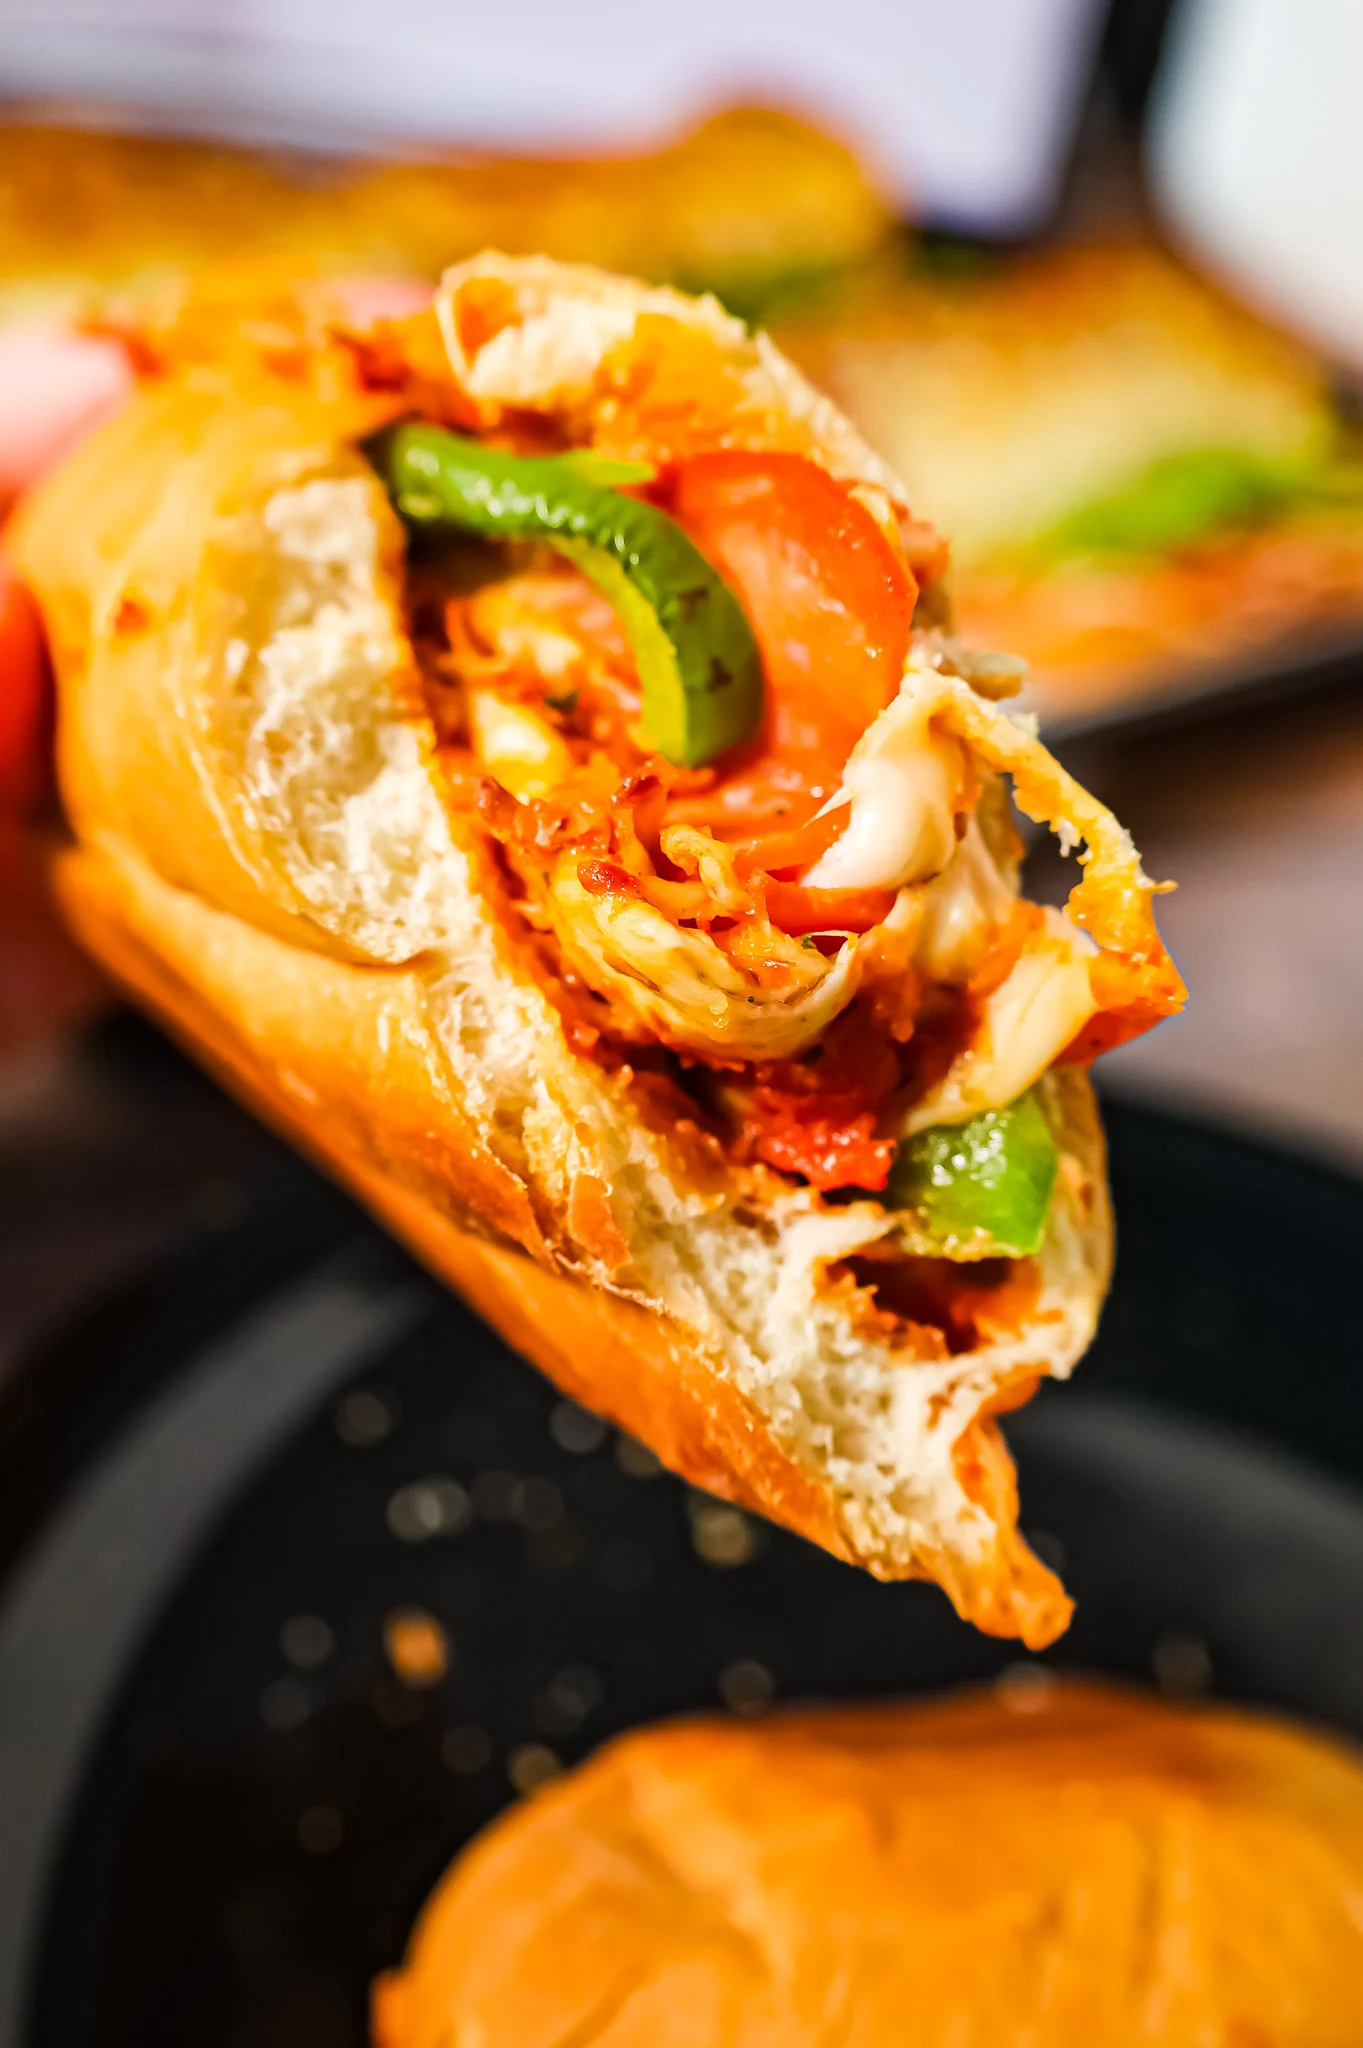 Pizza Subs are an easy weeknight dinner recipe using 9 inch sub rolls loaded with pizza sauce, mozzarella cheese, pepperoni and green peppers and then baked until perfectly toasted.